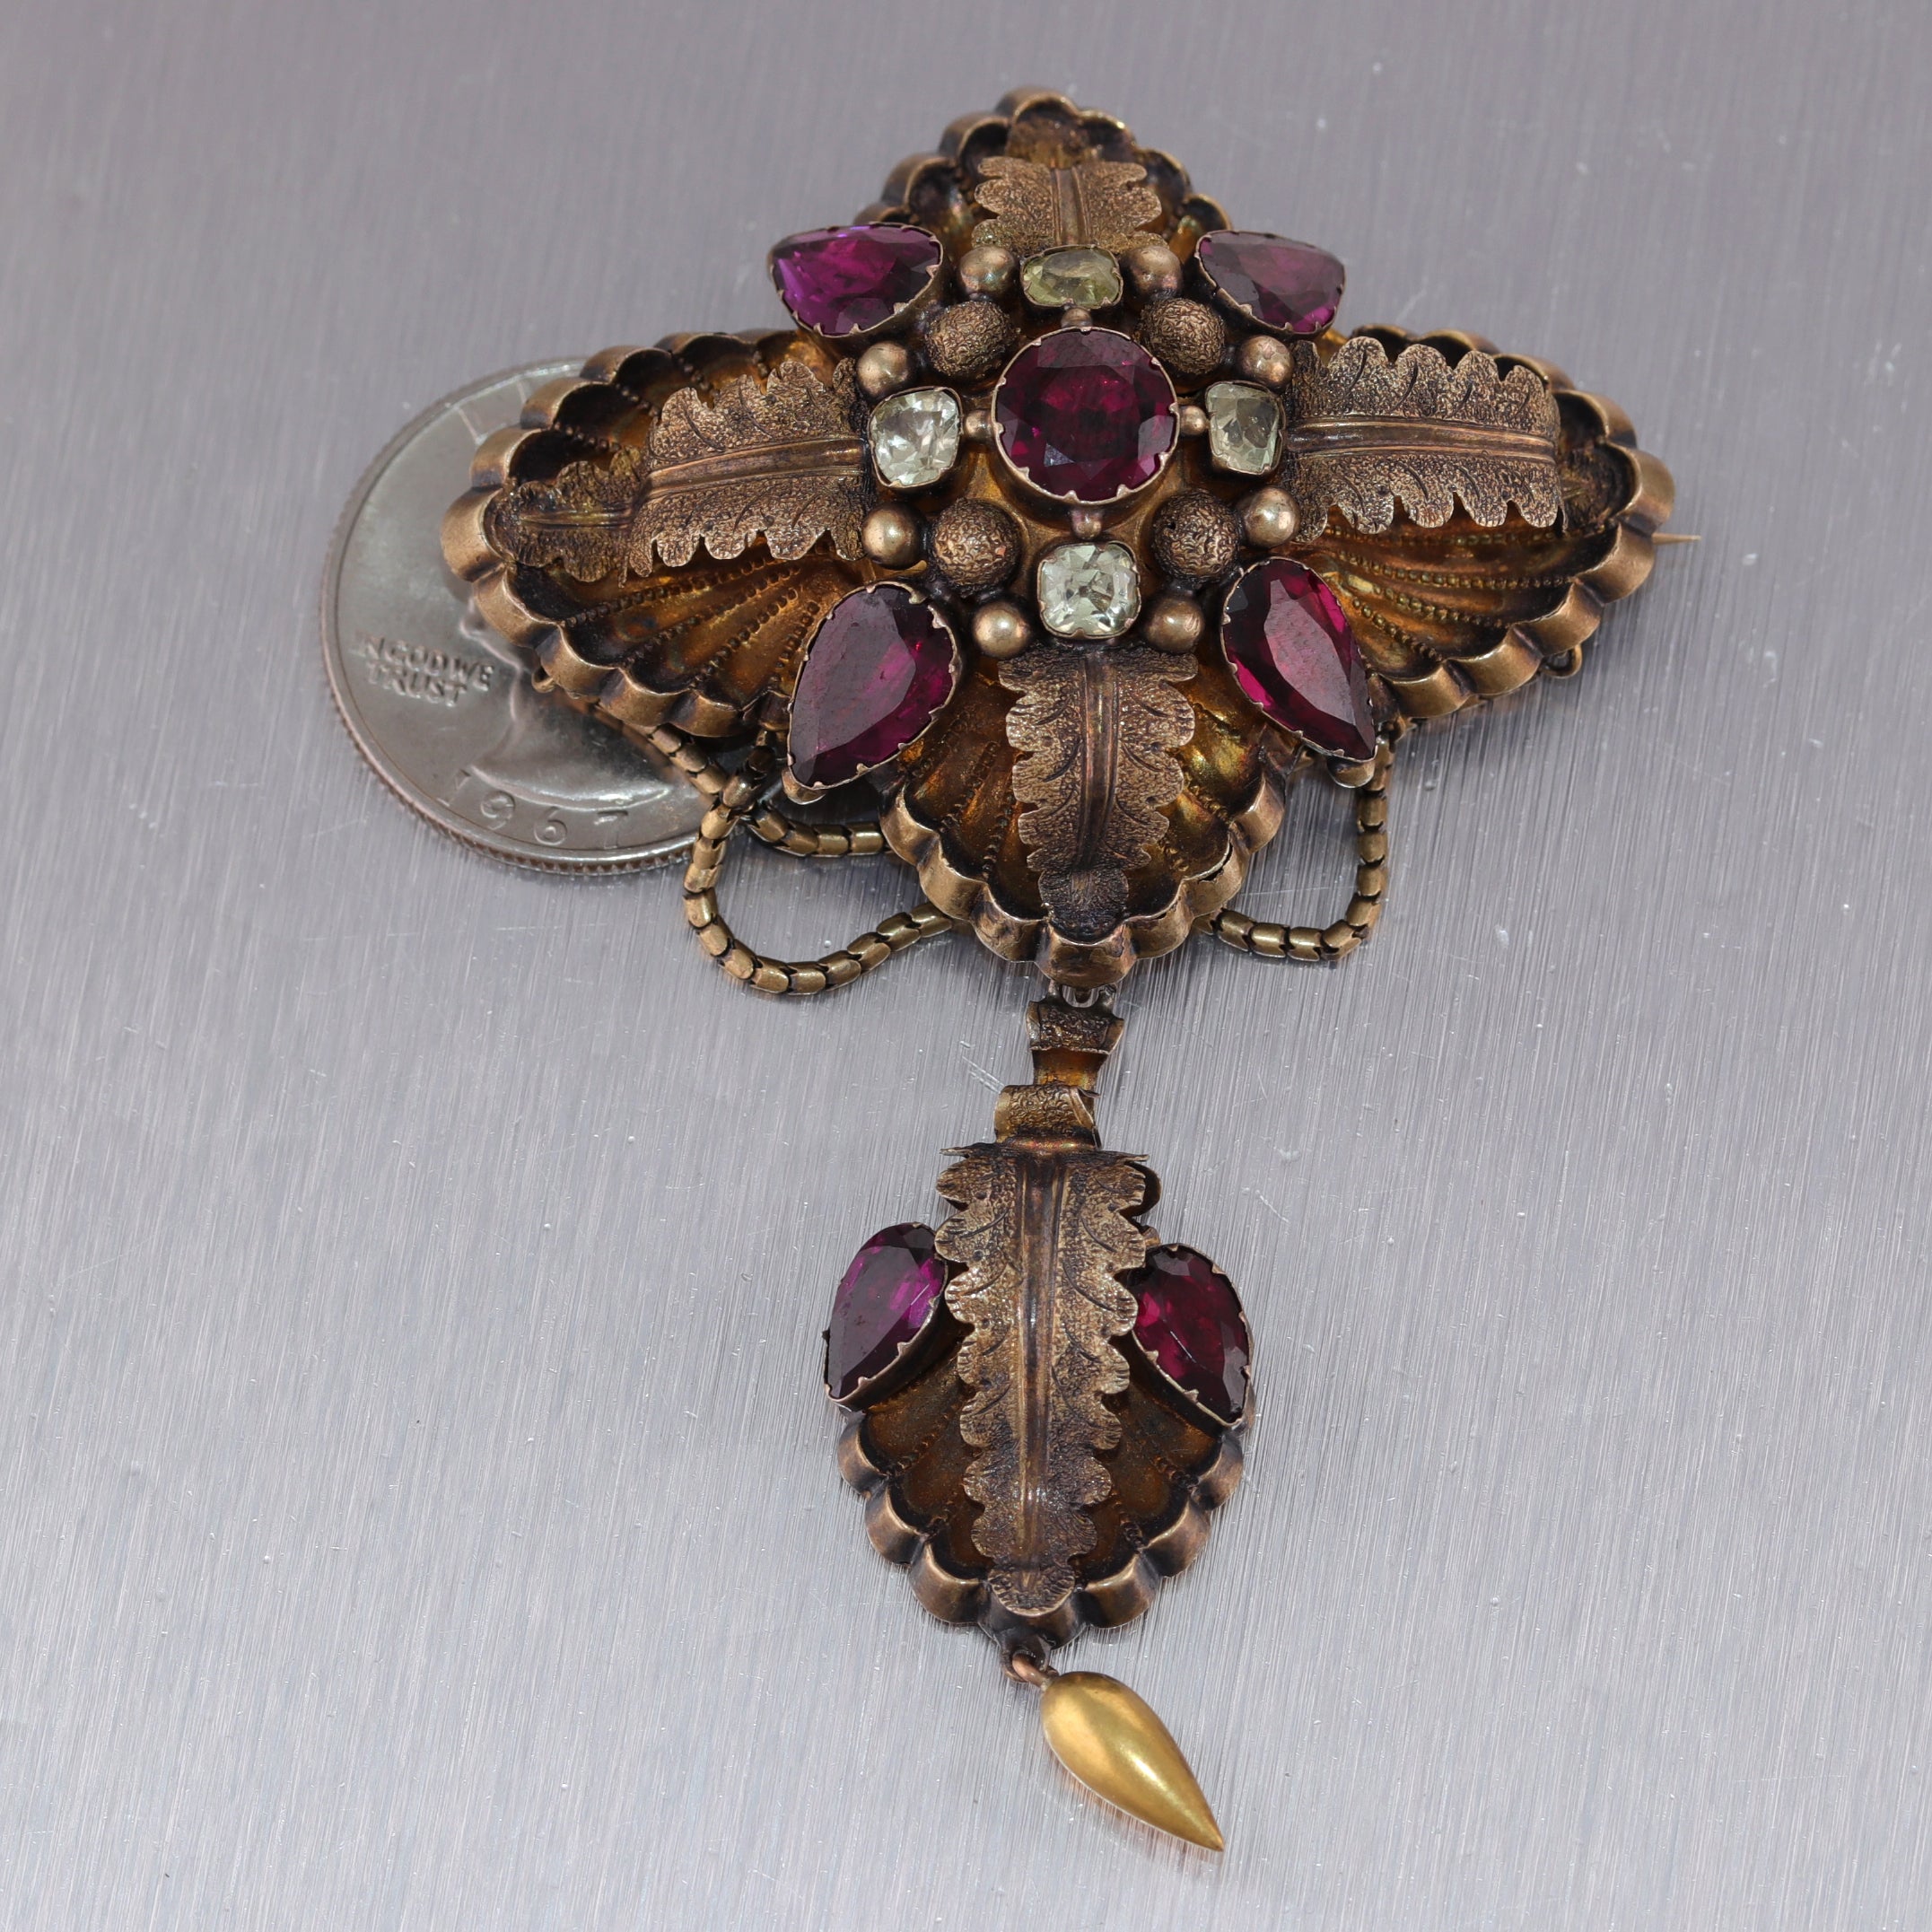 Antique Pins and Brooches